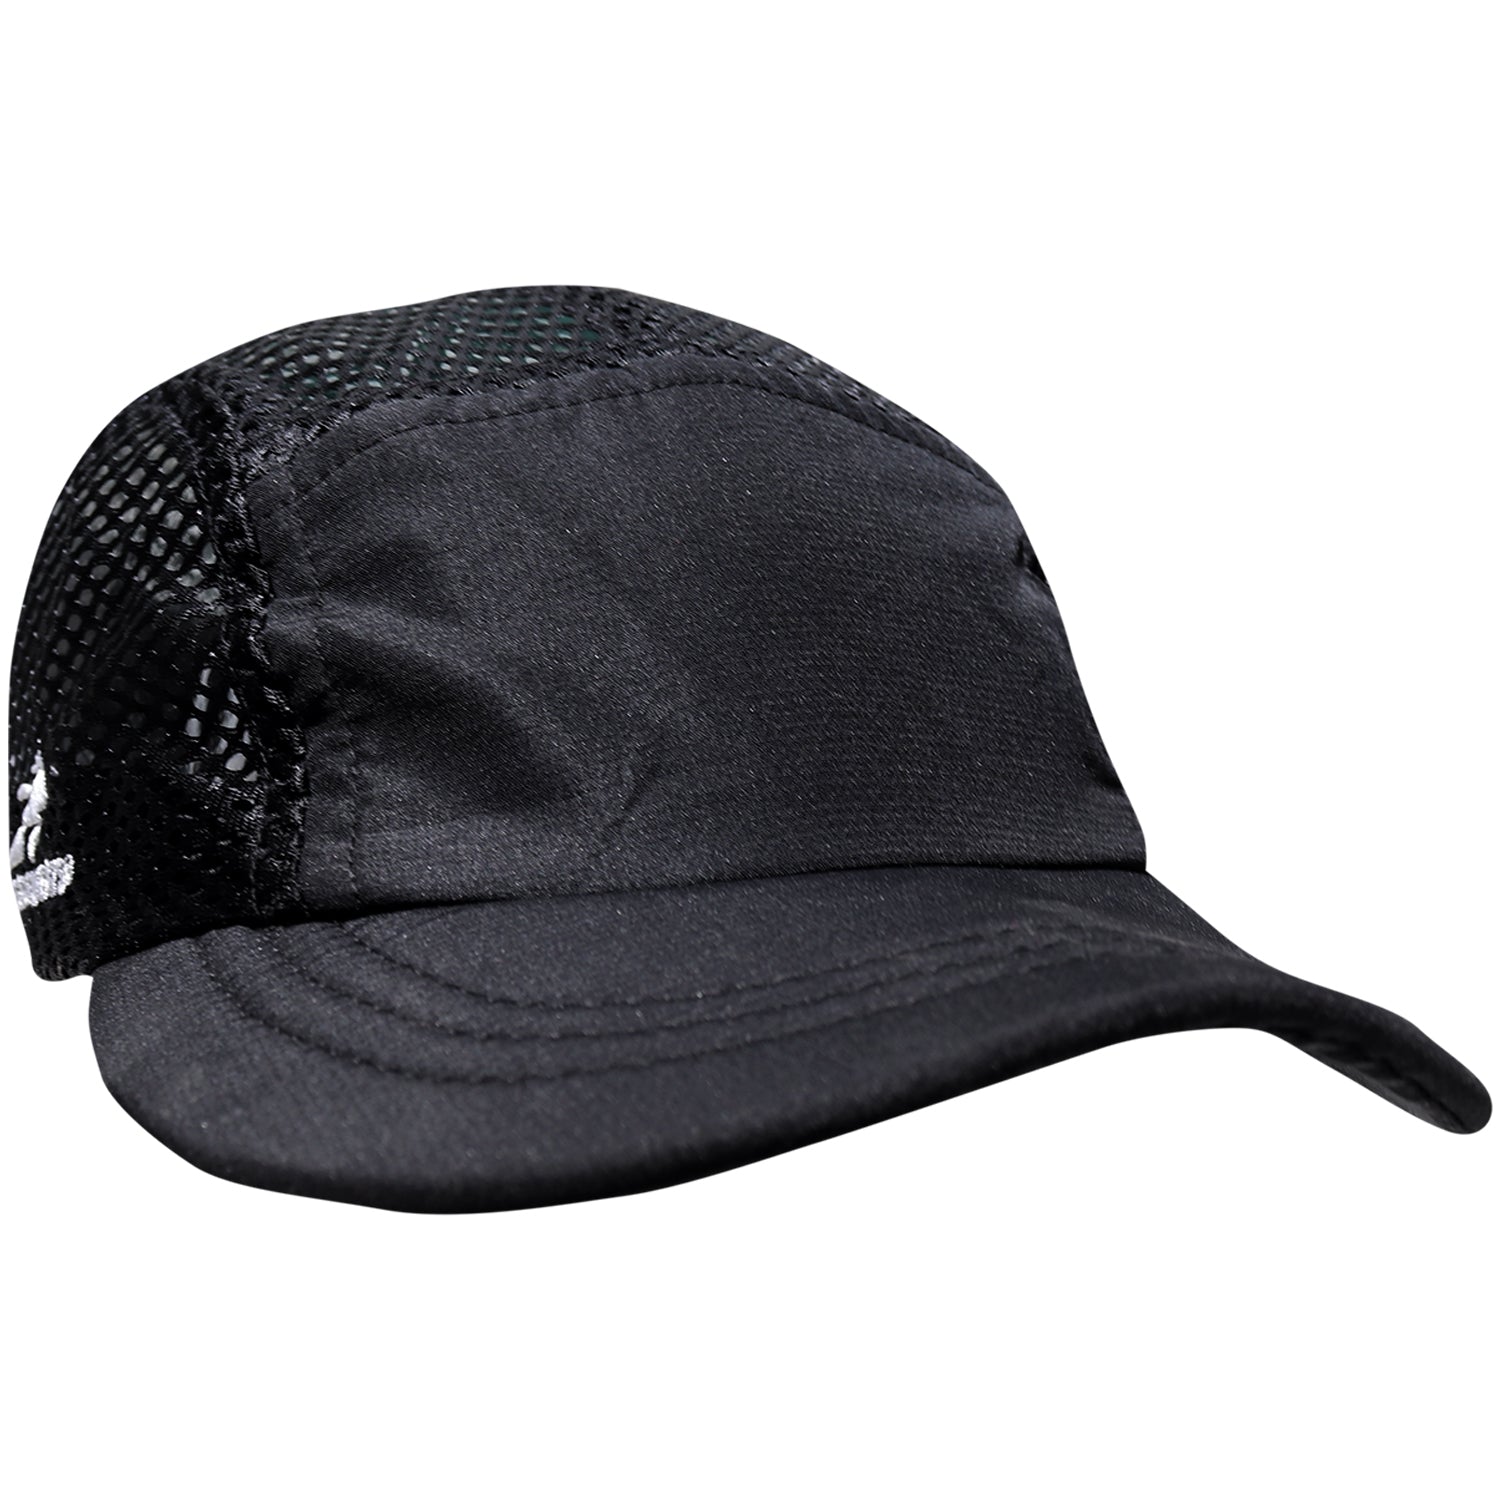 Crusher Hats, Foldable Ventilated Running Hats